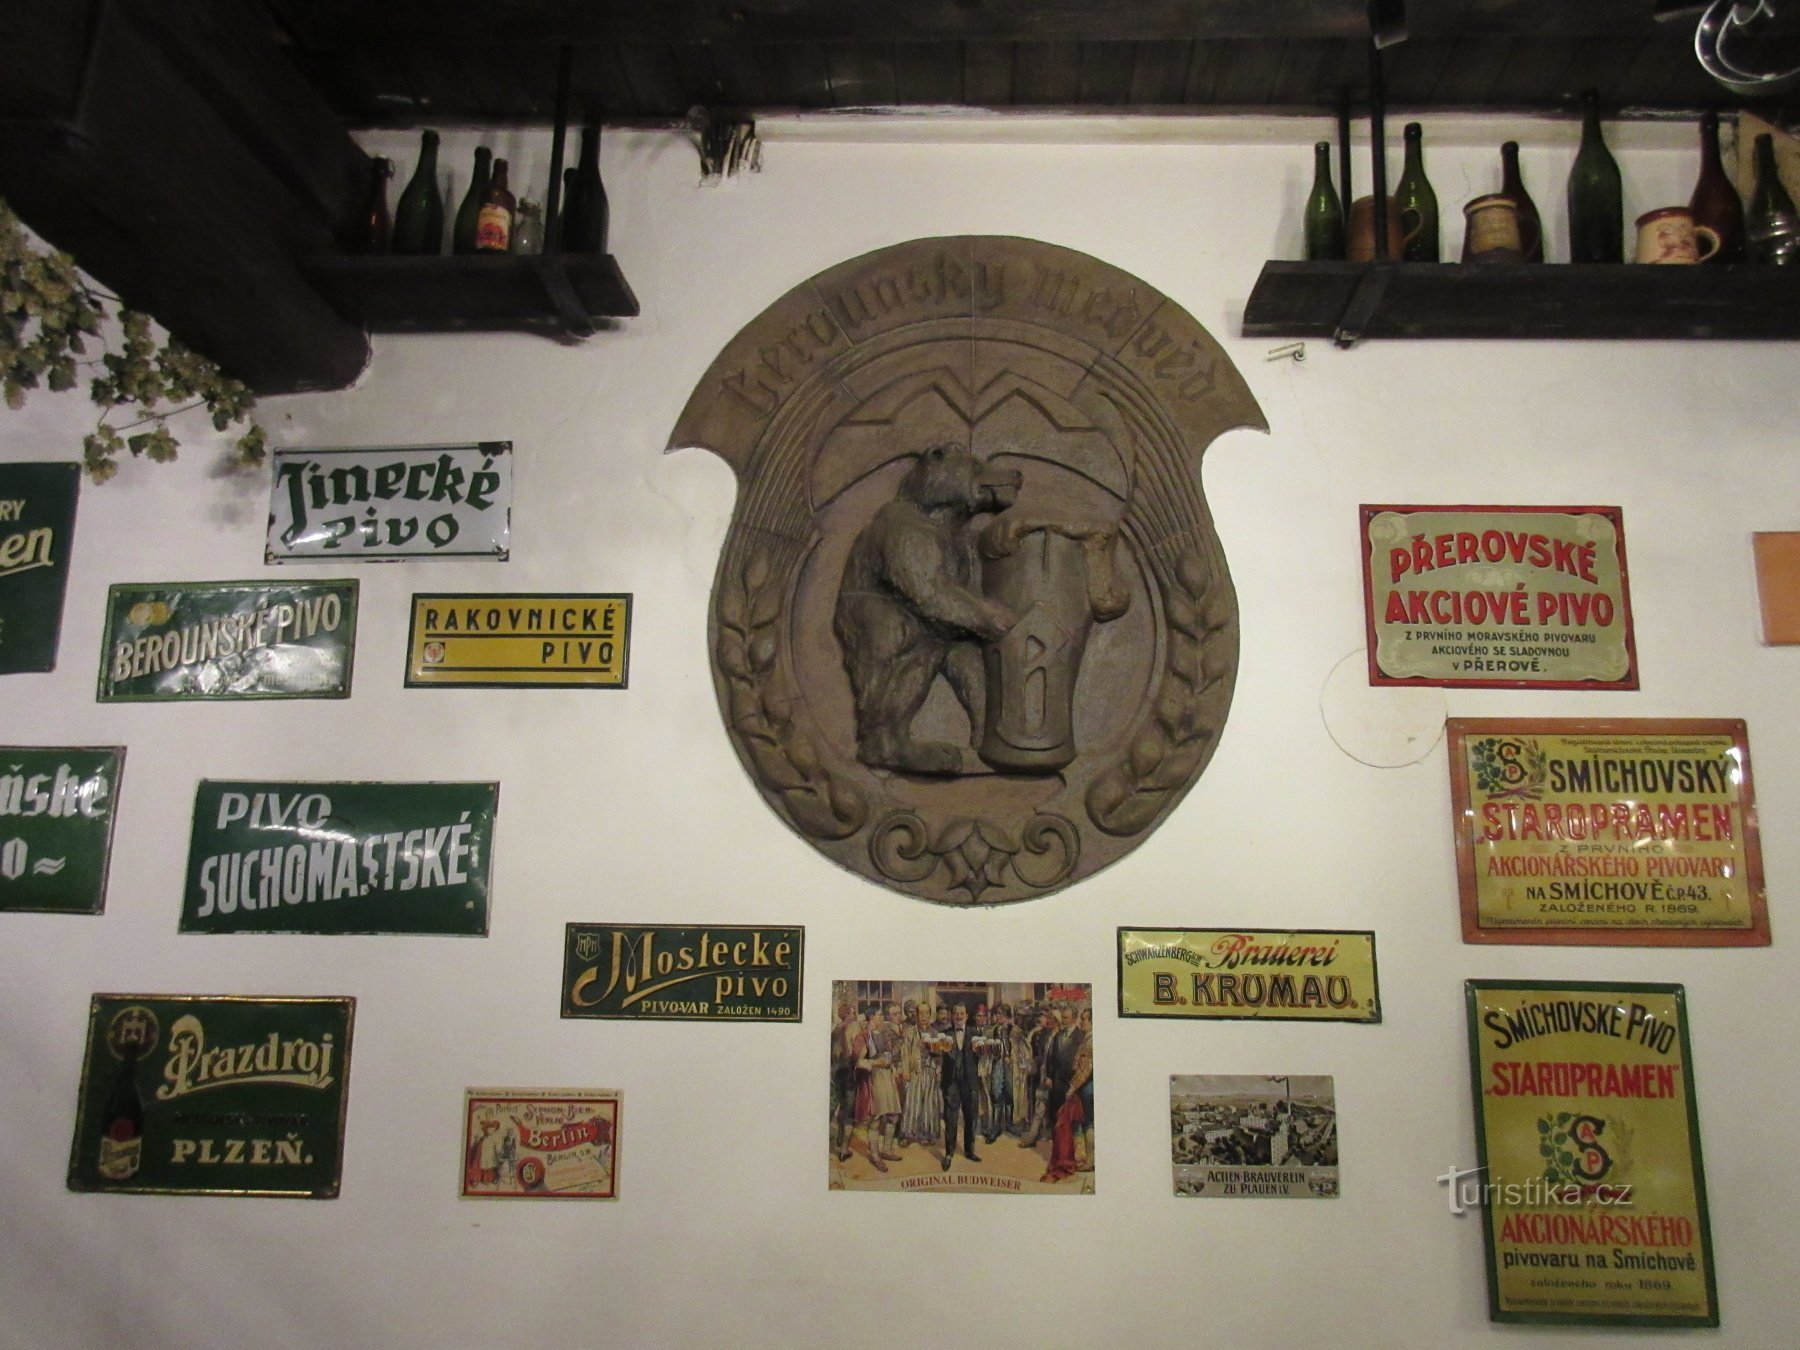 The history of brewing in Beroun and the family brewery Berounský medvěd